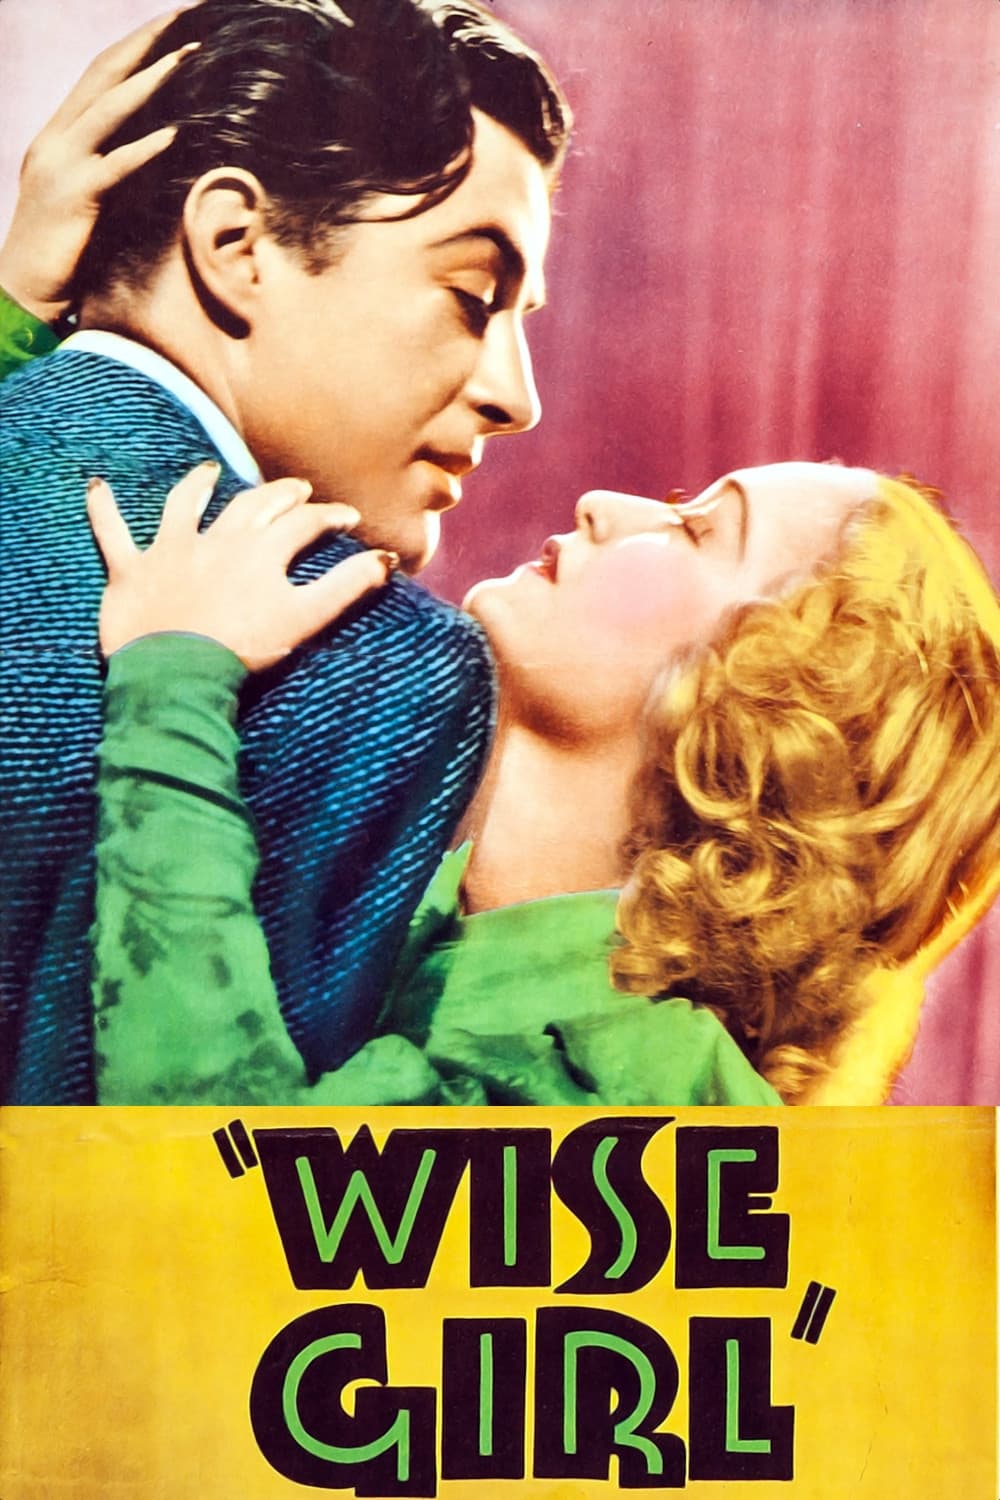 Wise Girl (1937)